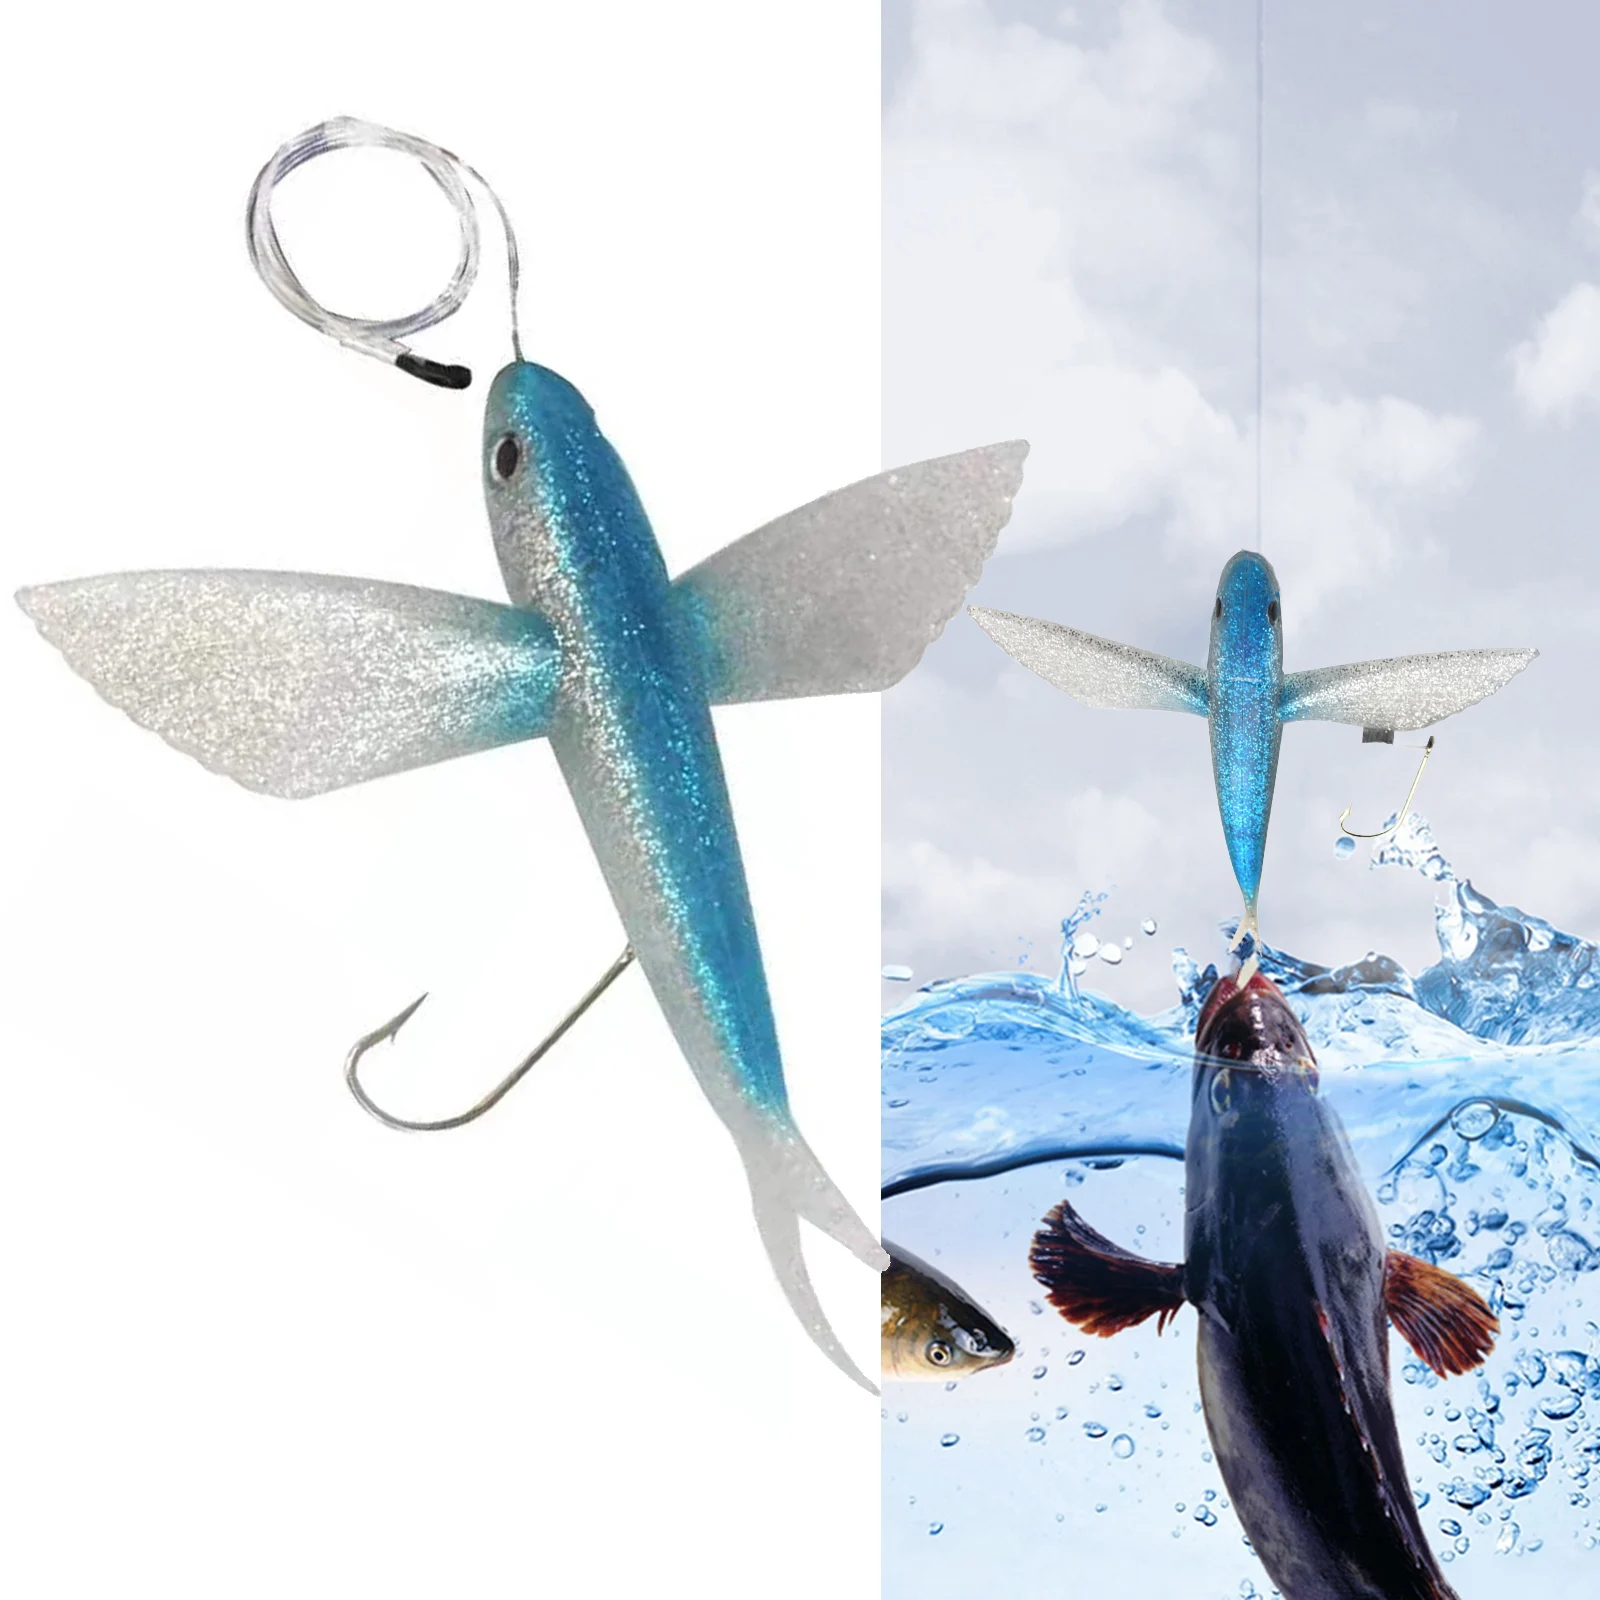 

Flying Fish Artificial Bait Soft Tuna Lure Seawater Fishing Lure For Kingfish 3D Simulation Fishing Lure Fish Tackle Accessories